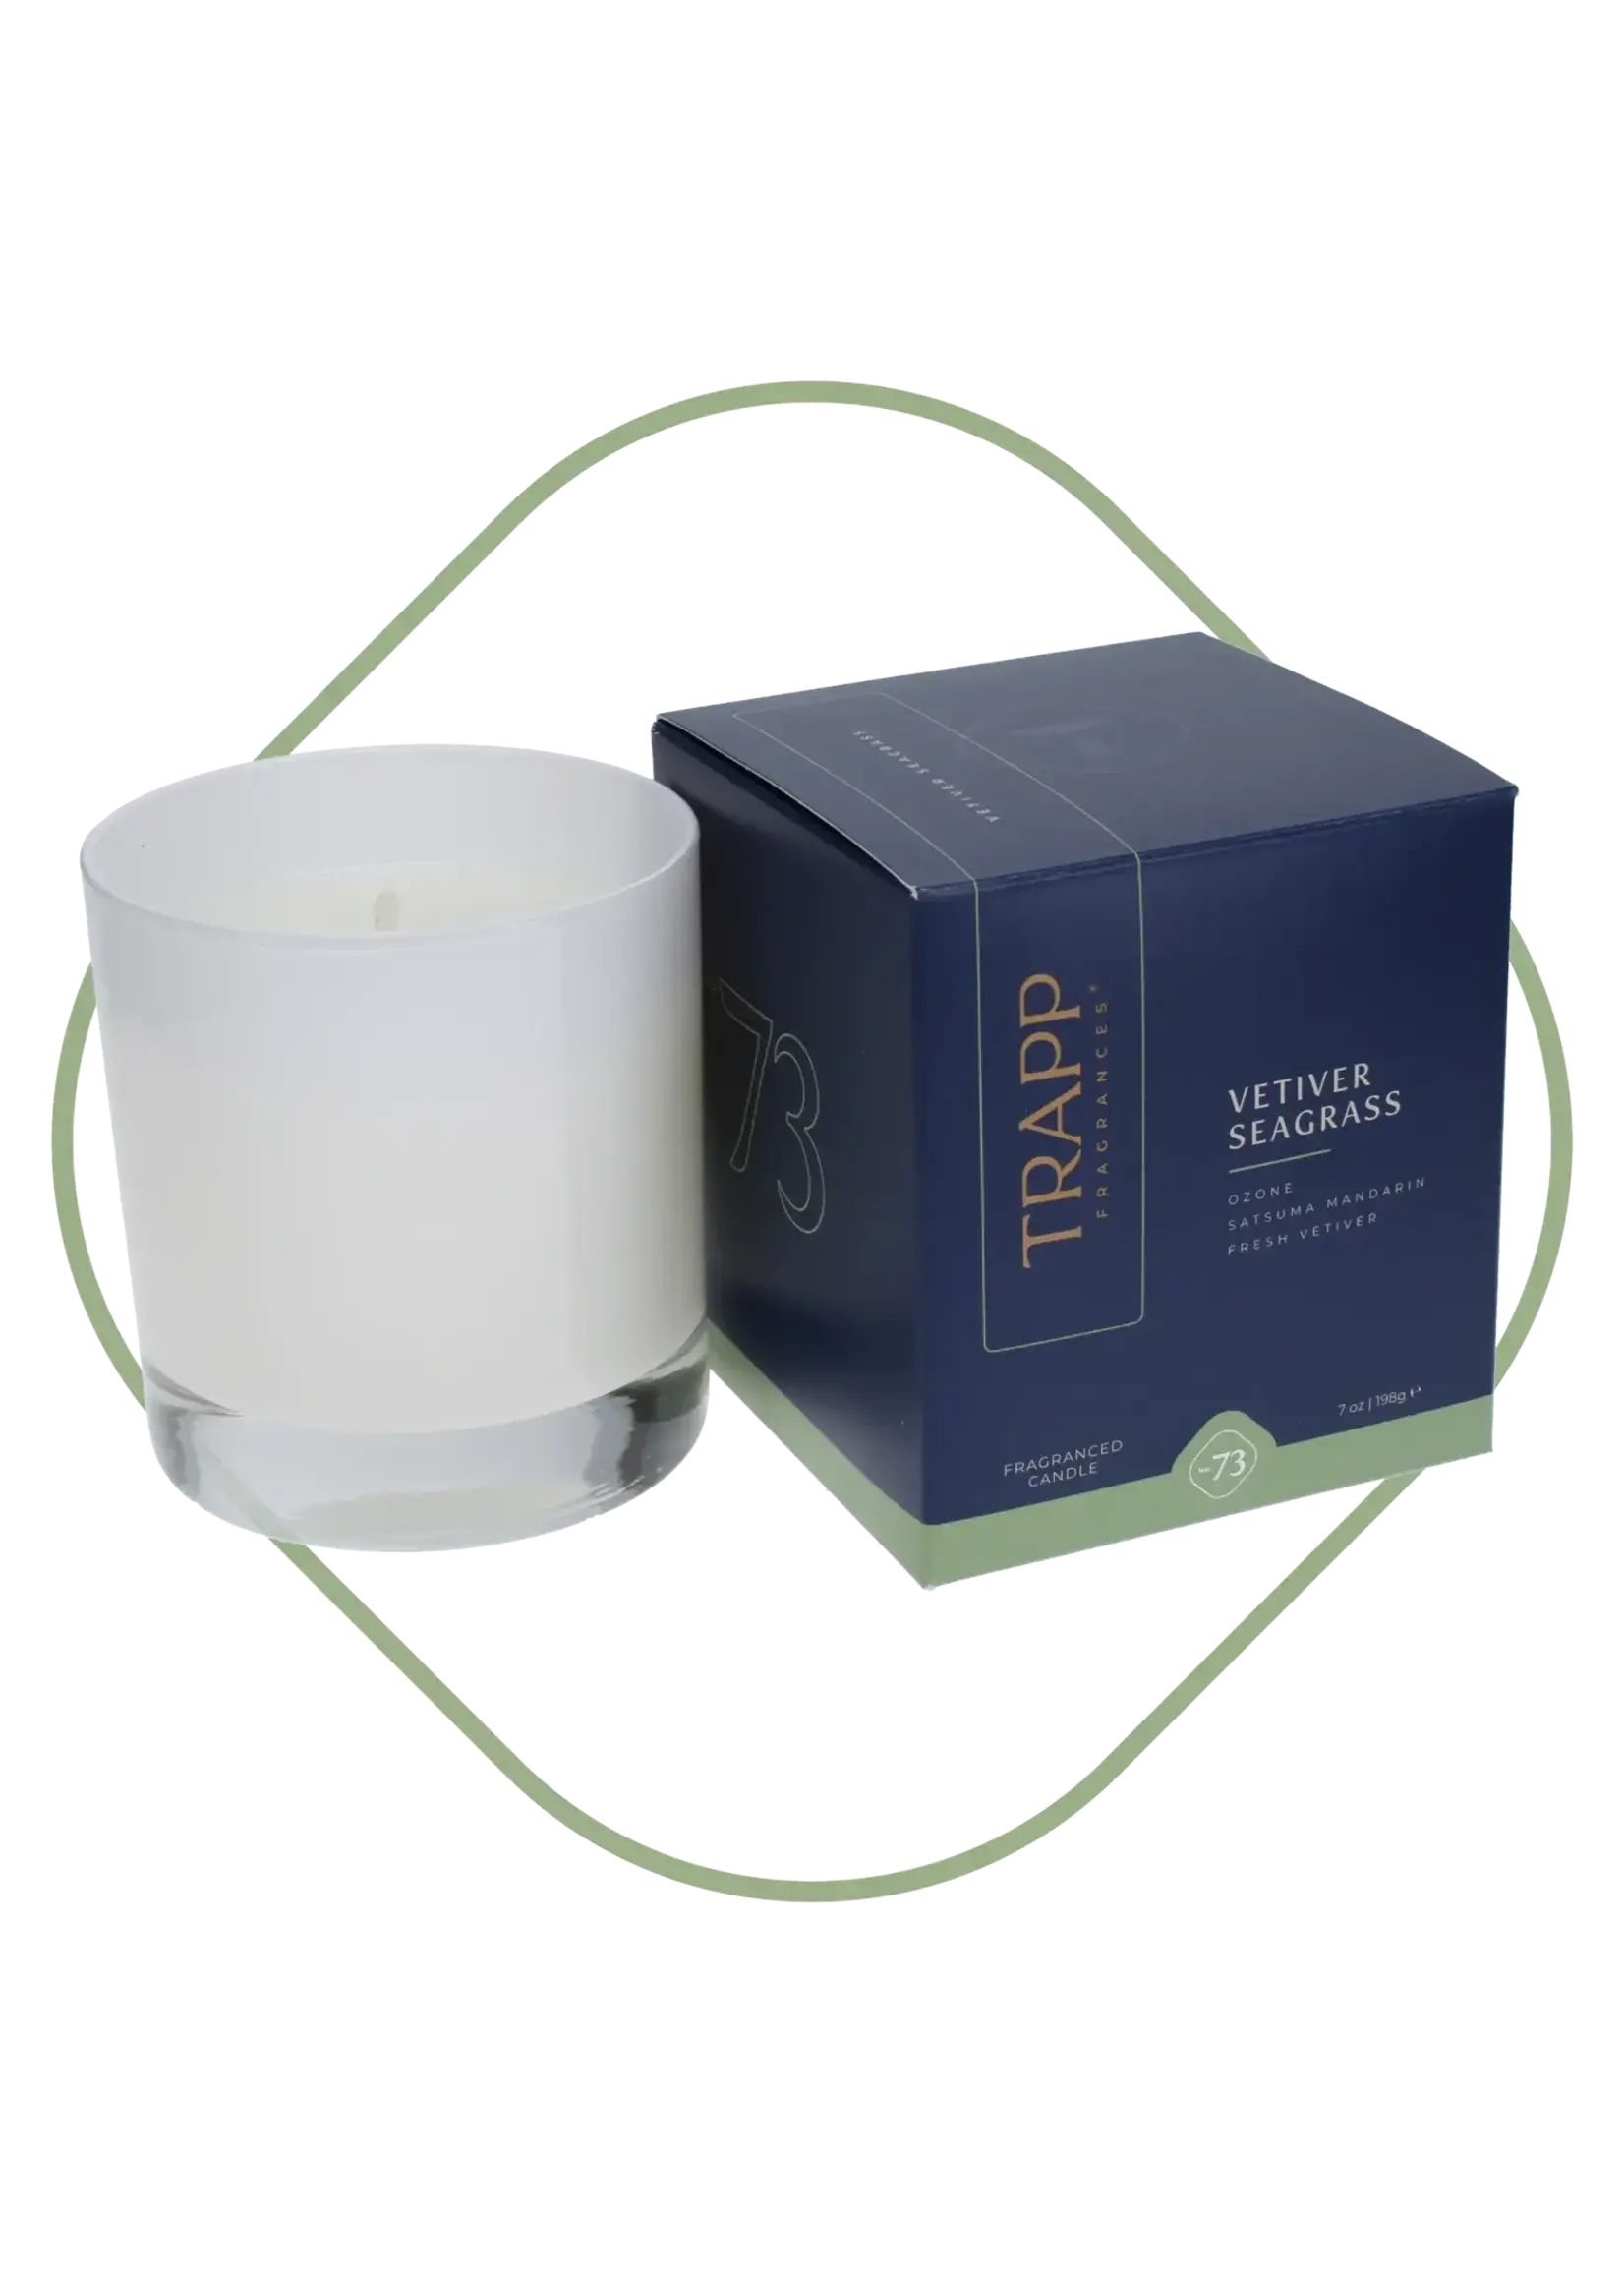 Trapp Candles No. 73 Vetiver Seagrass - 7 oz. Poured Candle